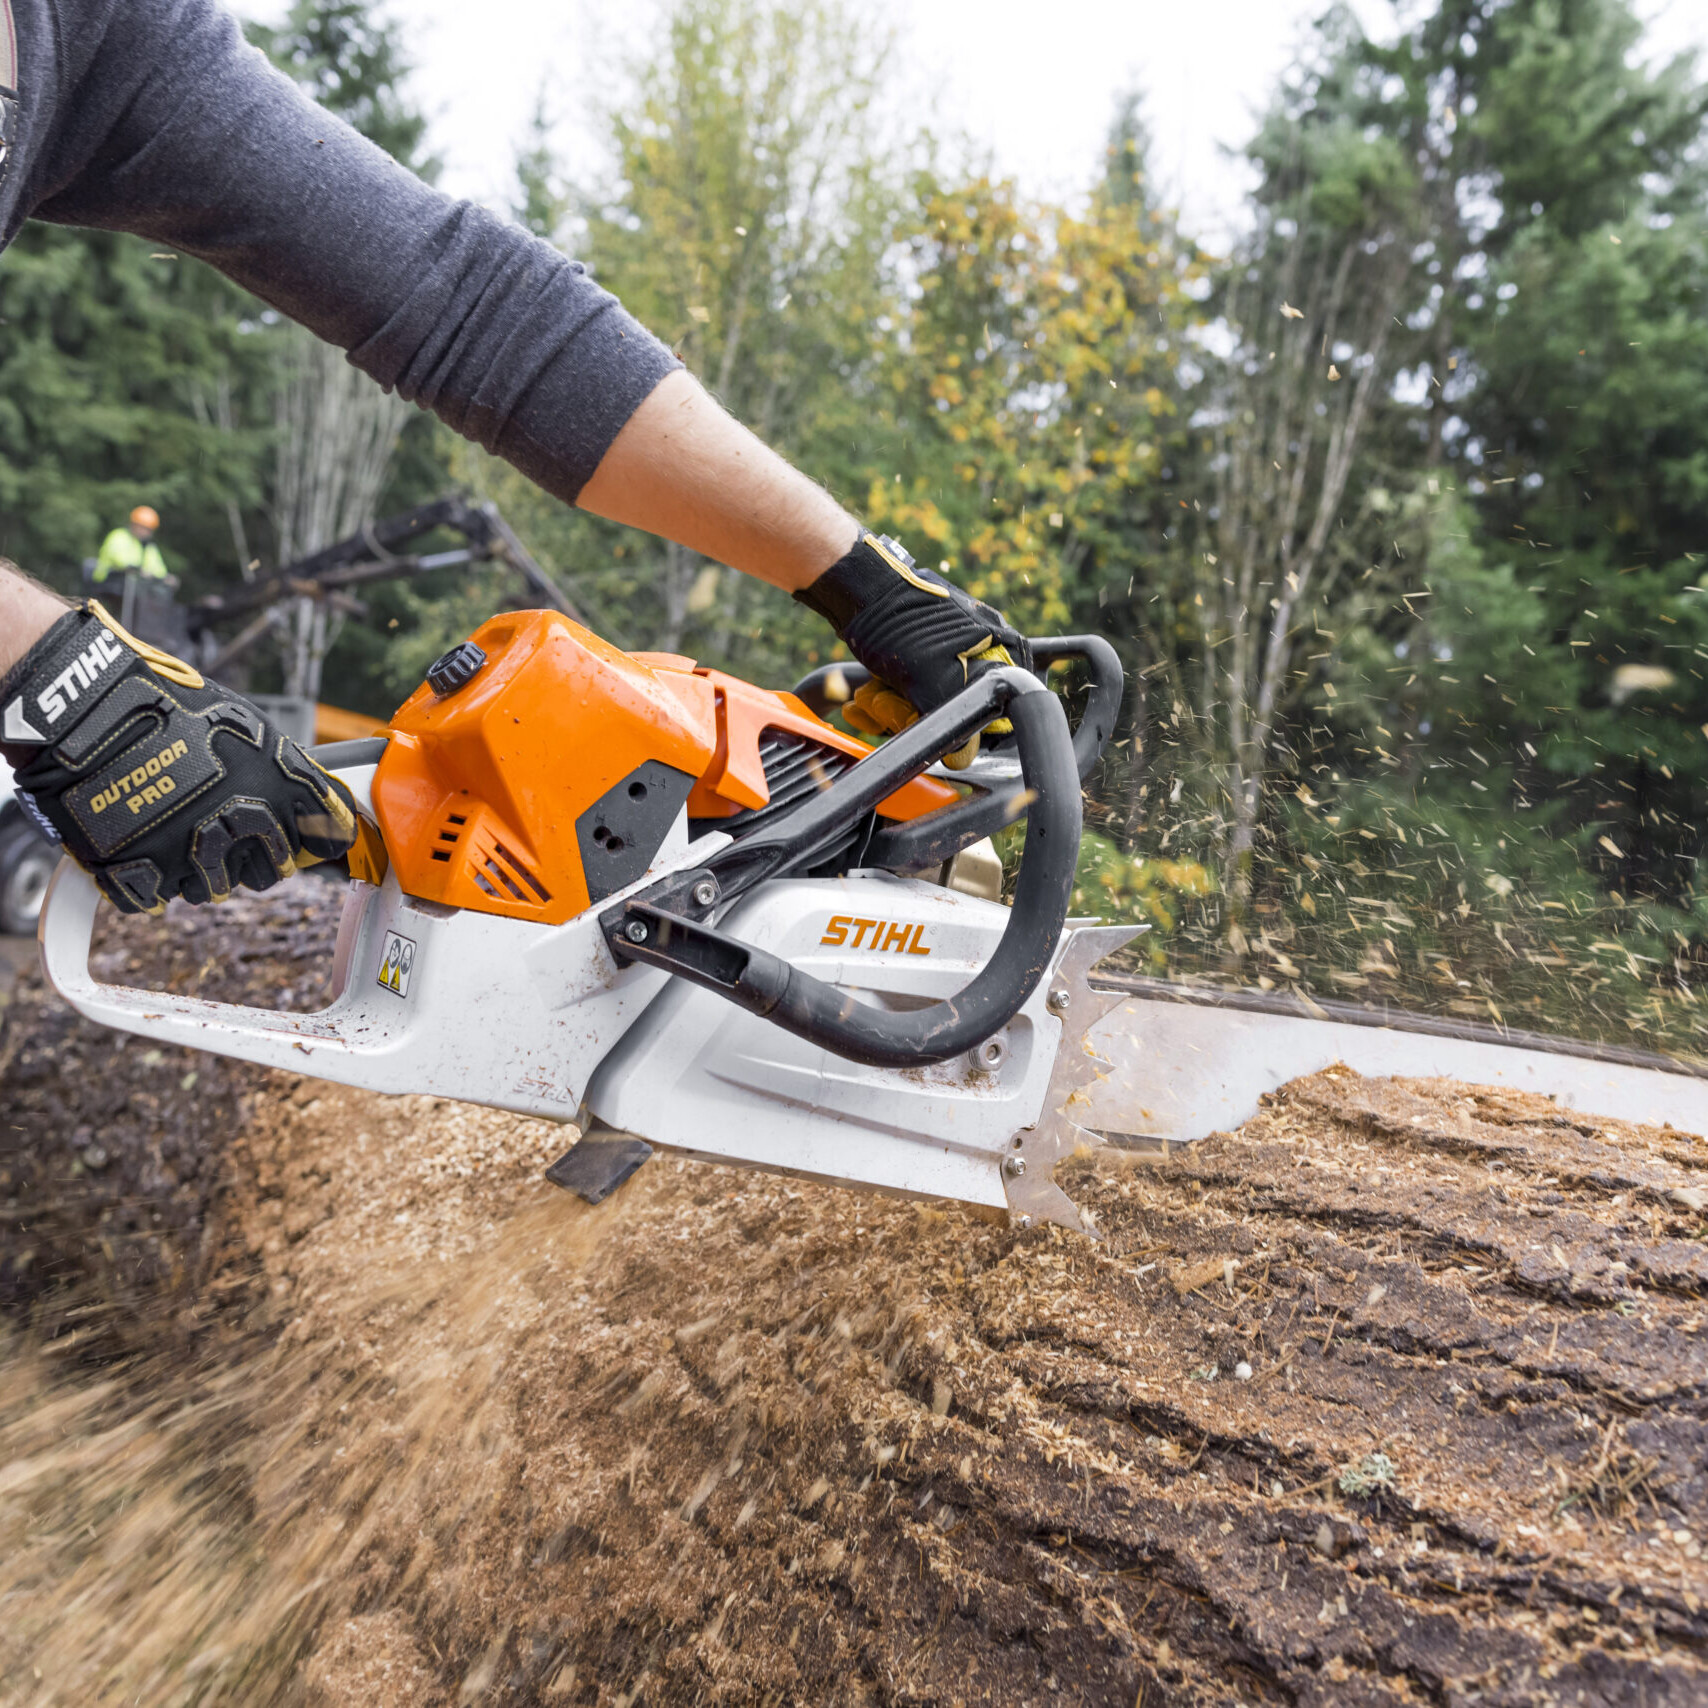 Stihl Chainsaw for sale in NJ